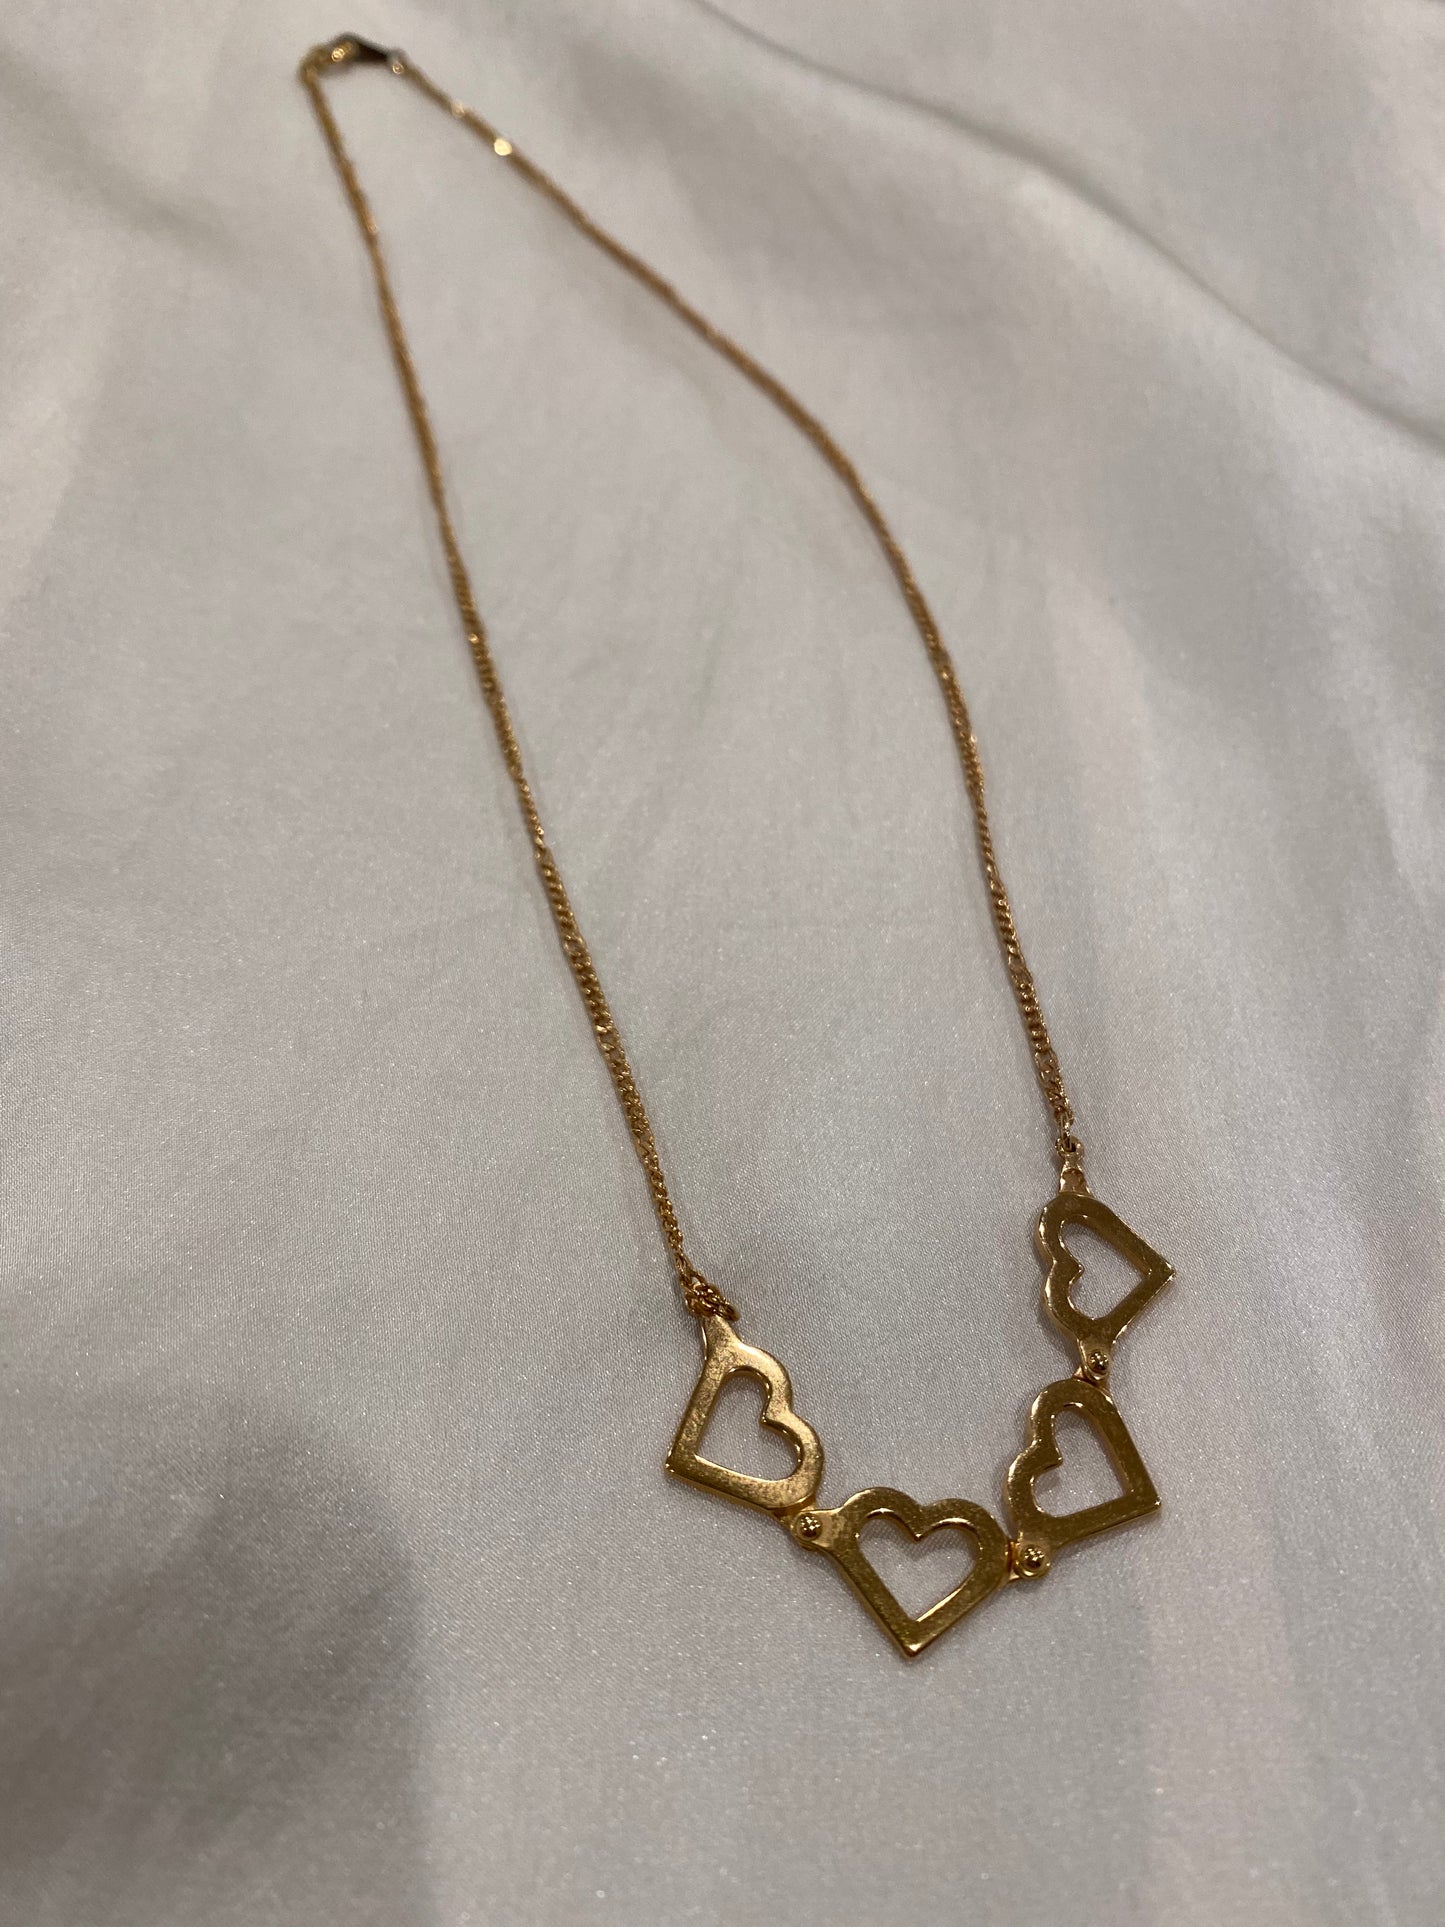 Linked Hearts necklace